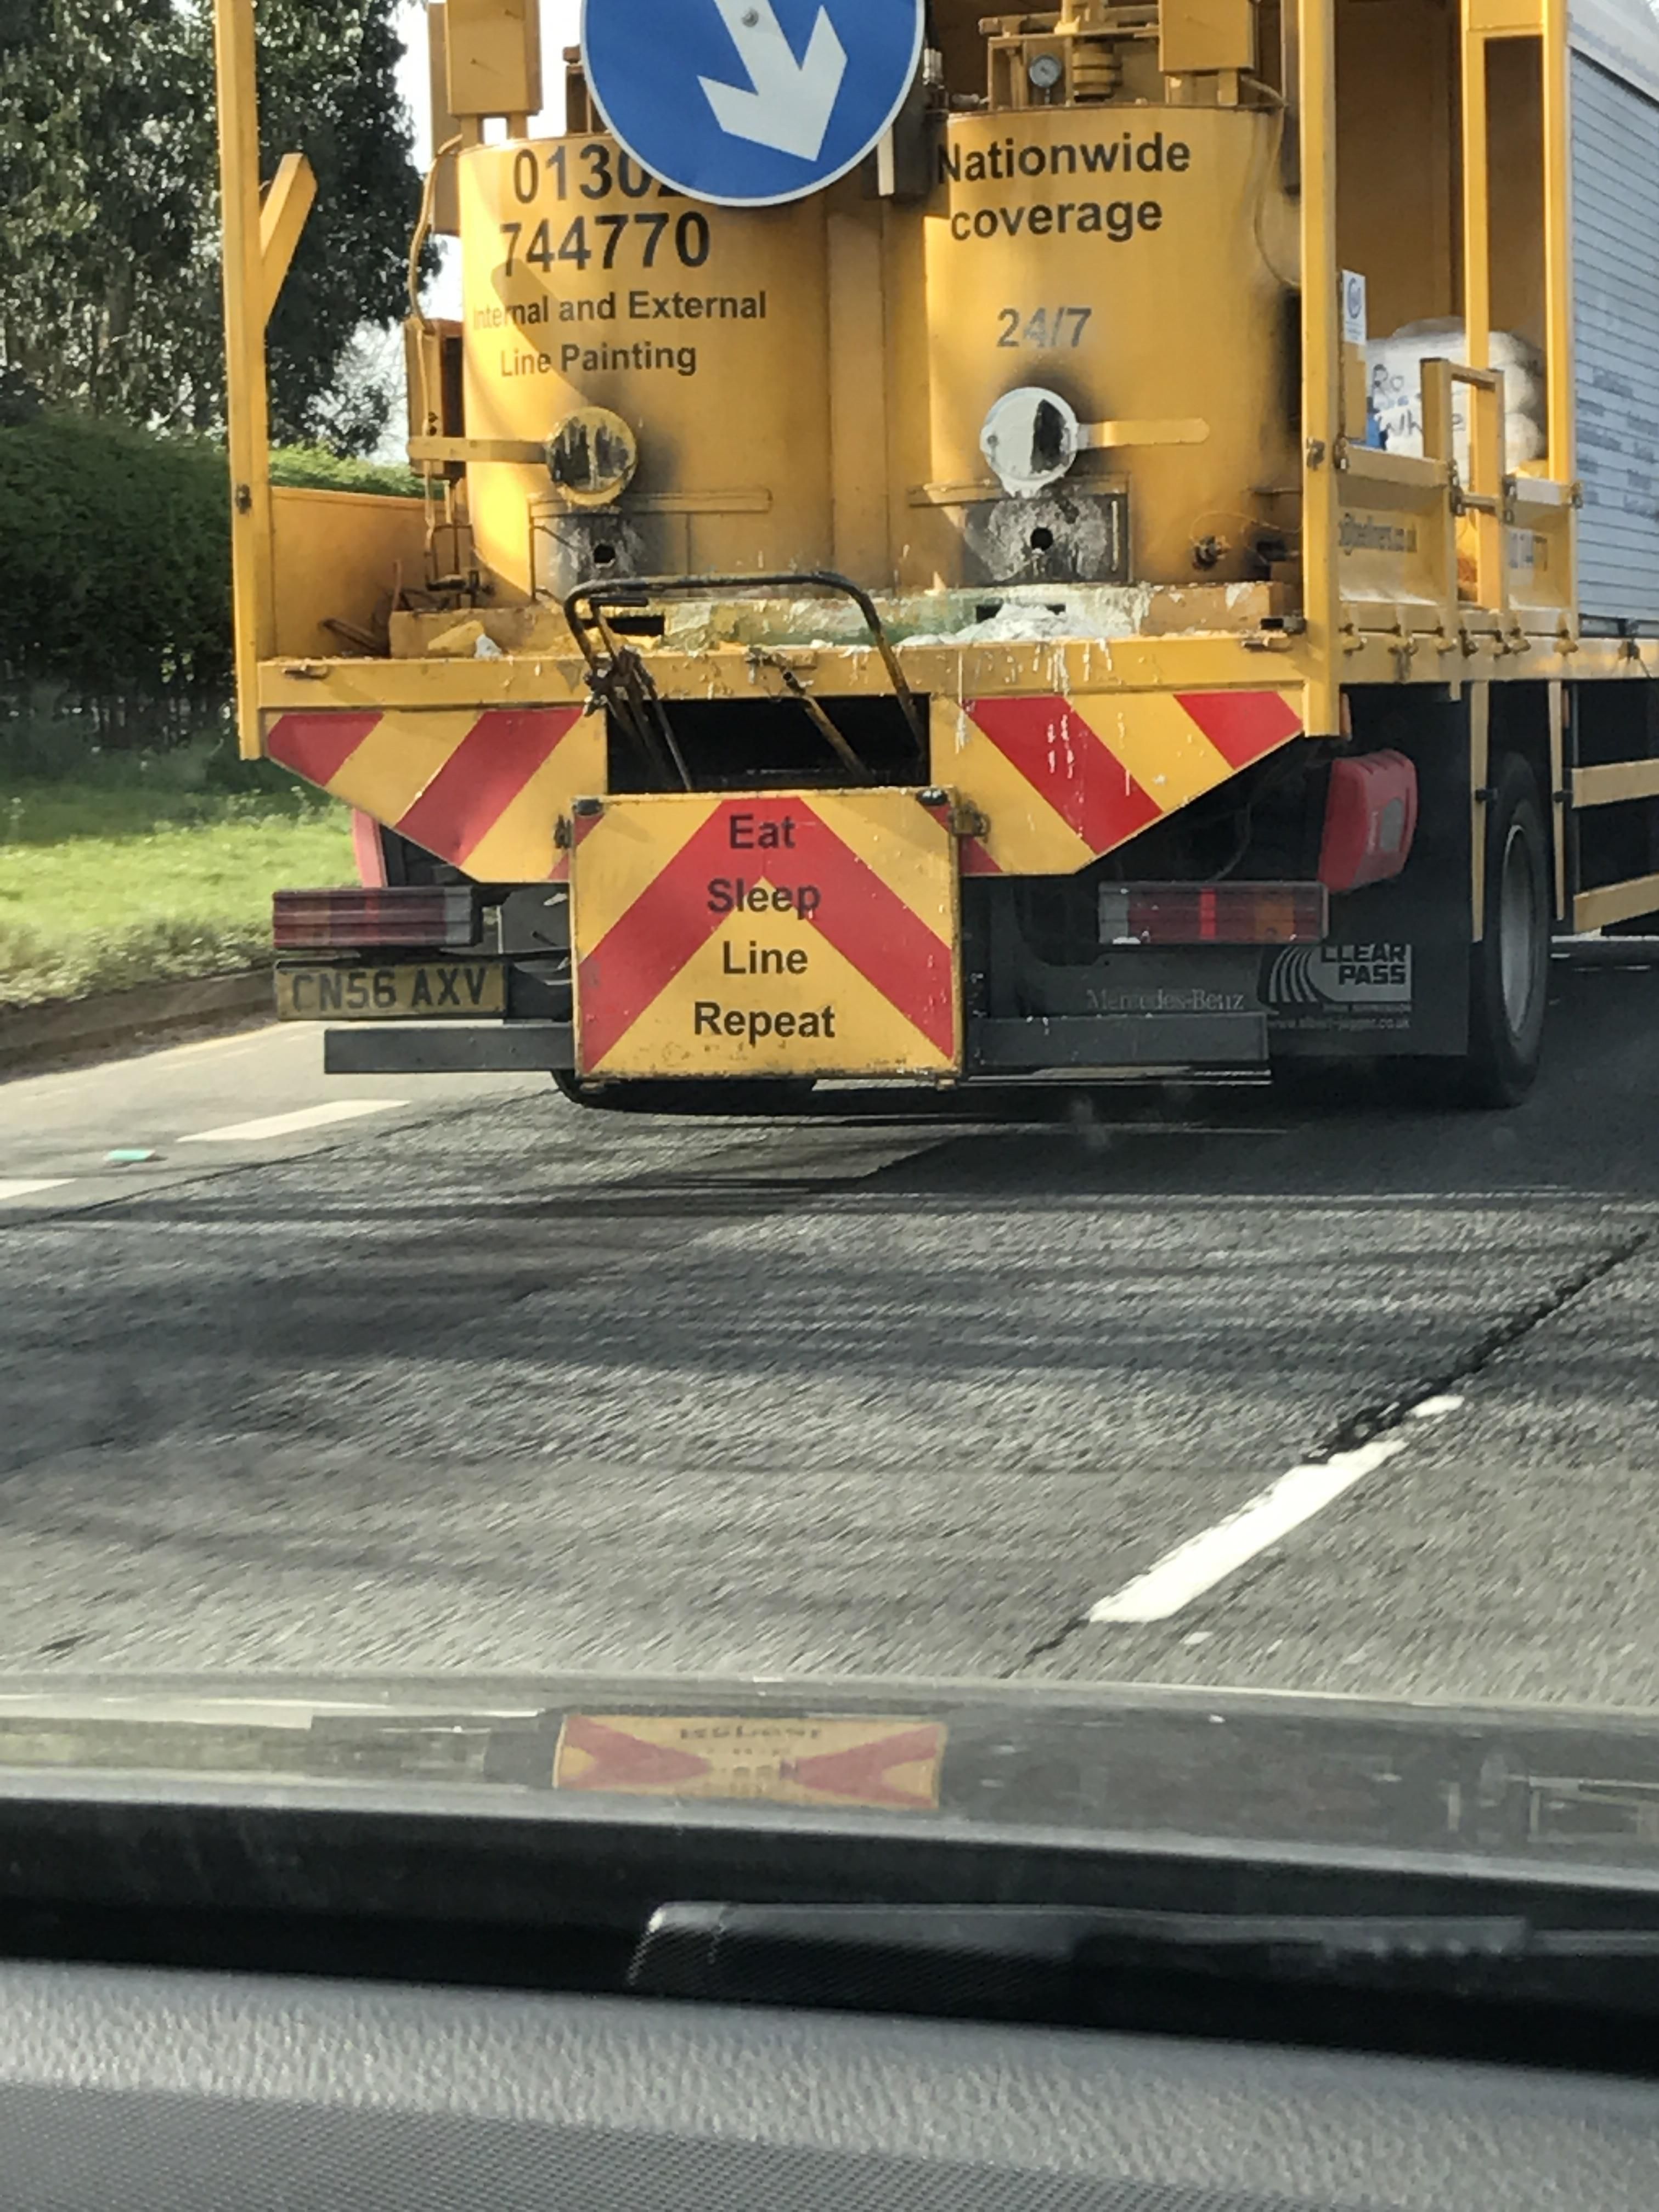 This Line Painting Vehicle Knows What's Up